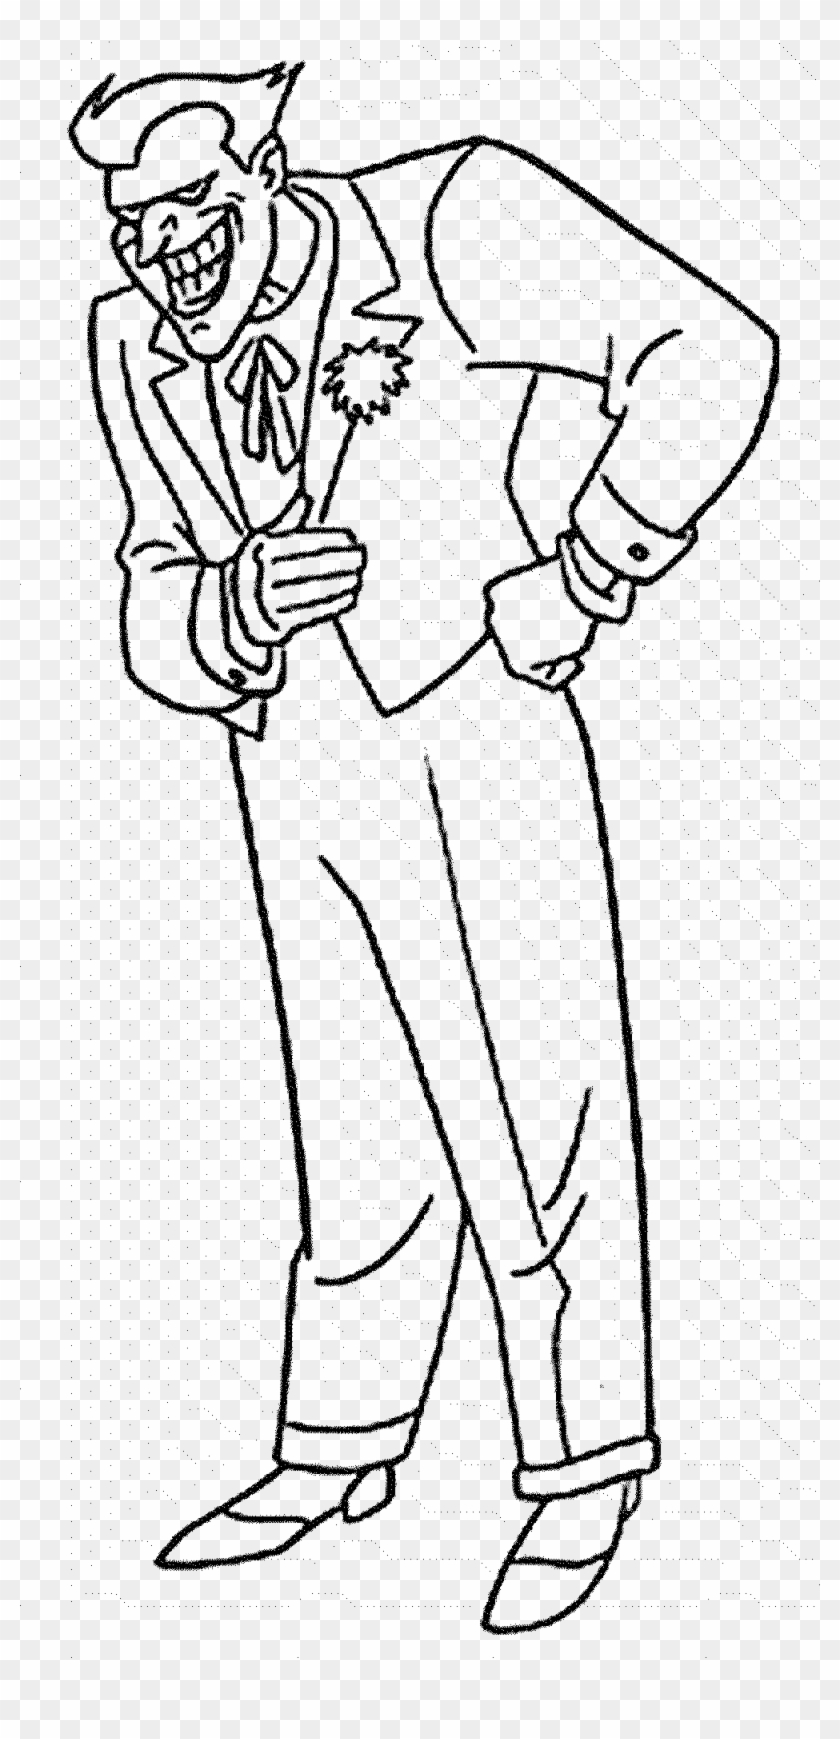 Inspiration Batman And Joker Coloring Pages - Batman The Animated Series Joker Outline Clipart